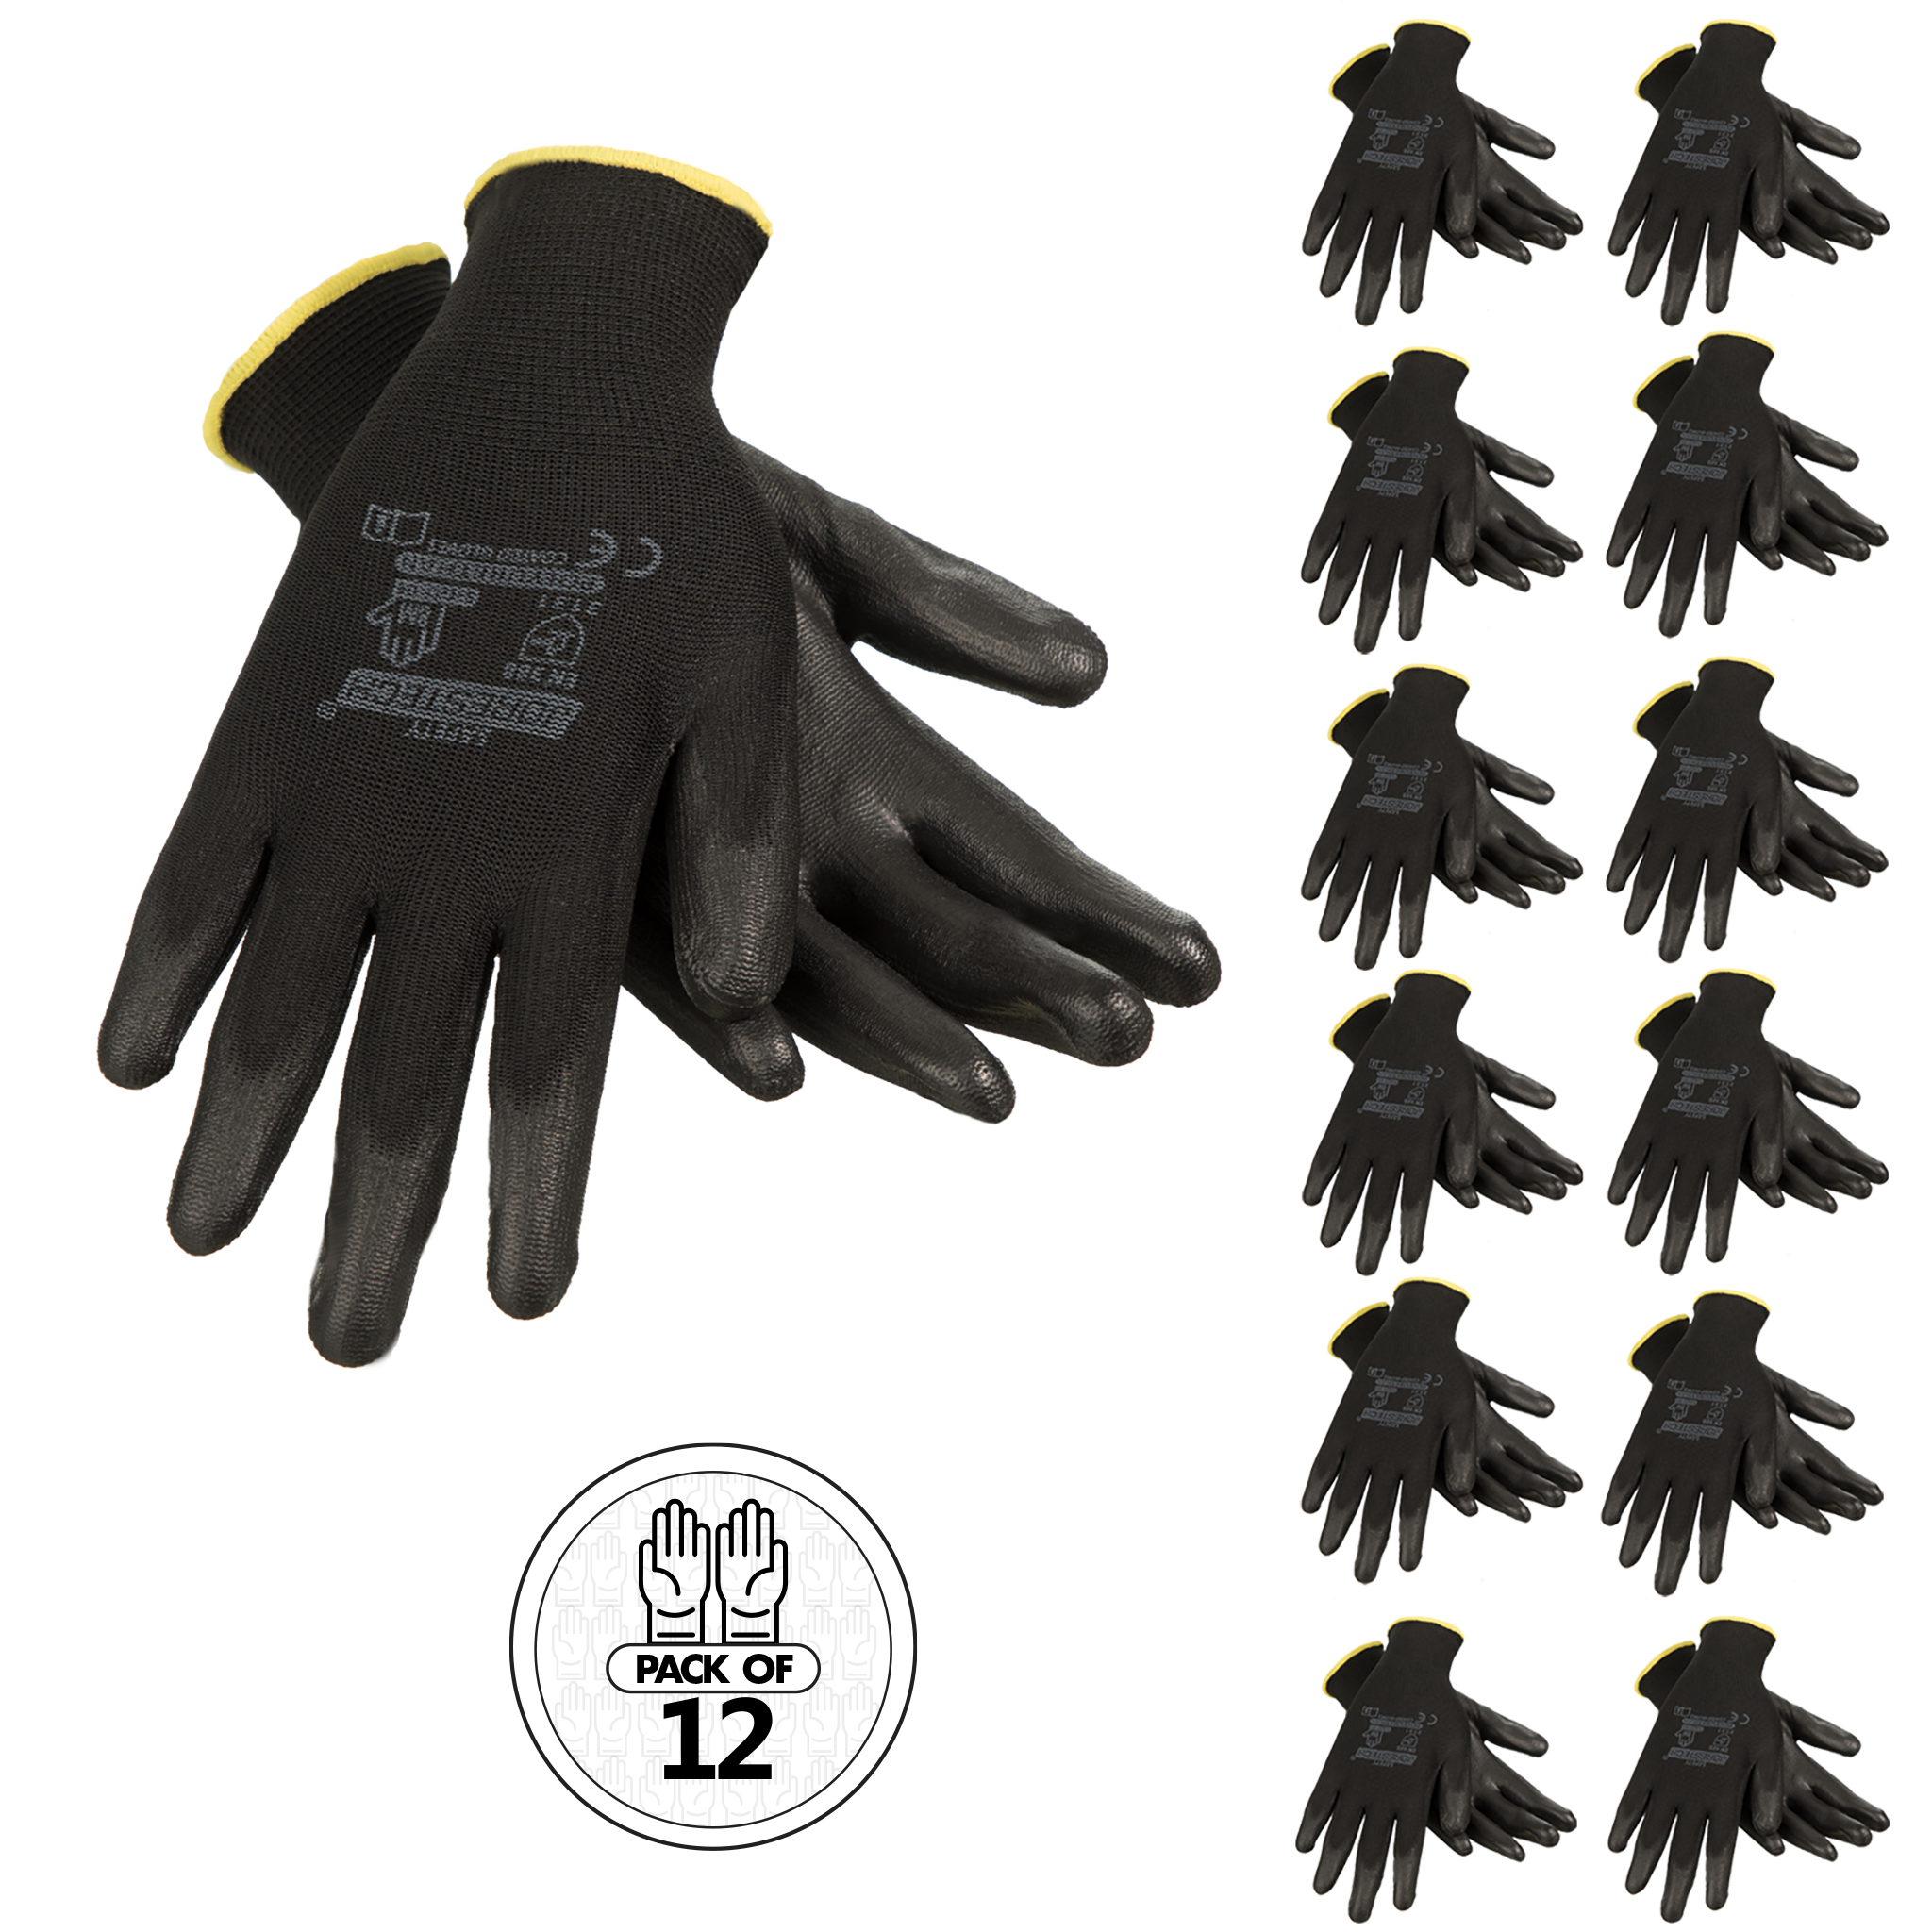 https://cdn.shopify.com/s/files/1/0517/5692/5094/products/THIN-SAFETY-WORK-GLOVES-WITH-POLYURETHANE-DIPPED-PALMS-PACK-OF-12-S-GD-06-JORESTECH-H_13.png?v=1671640024